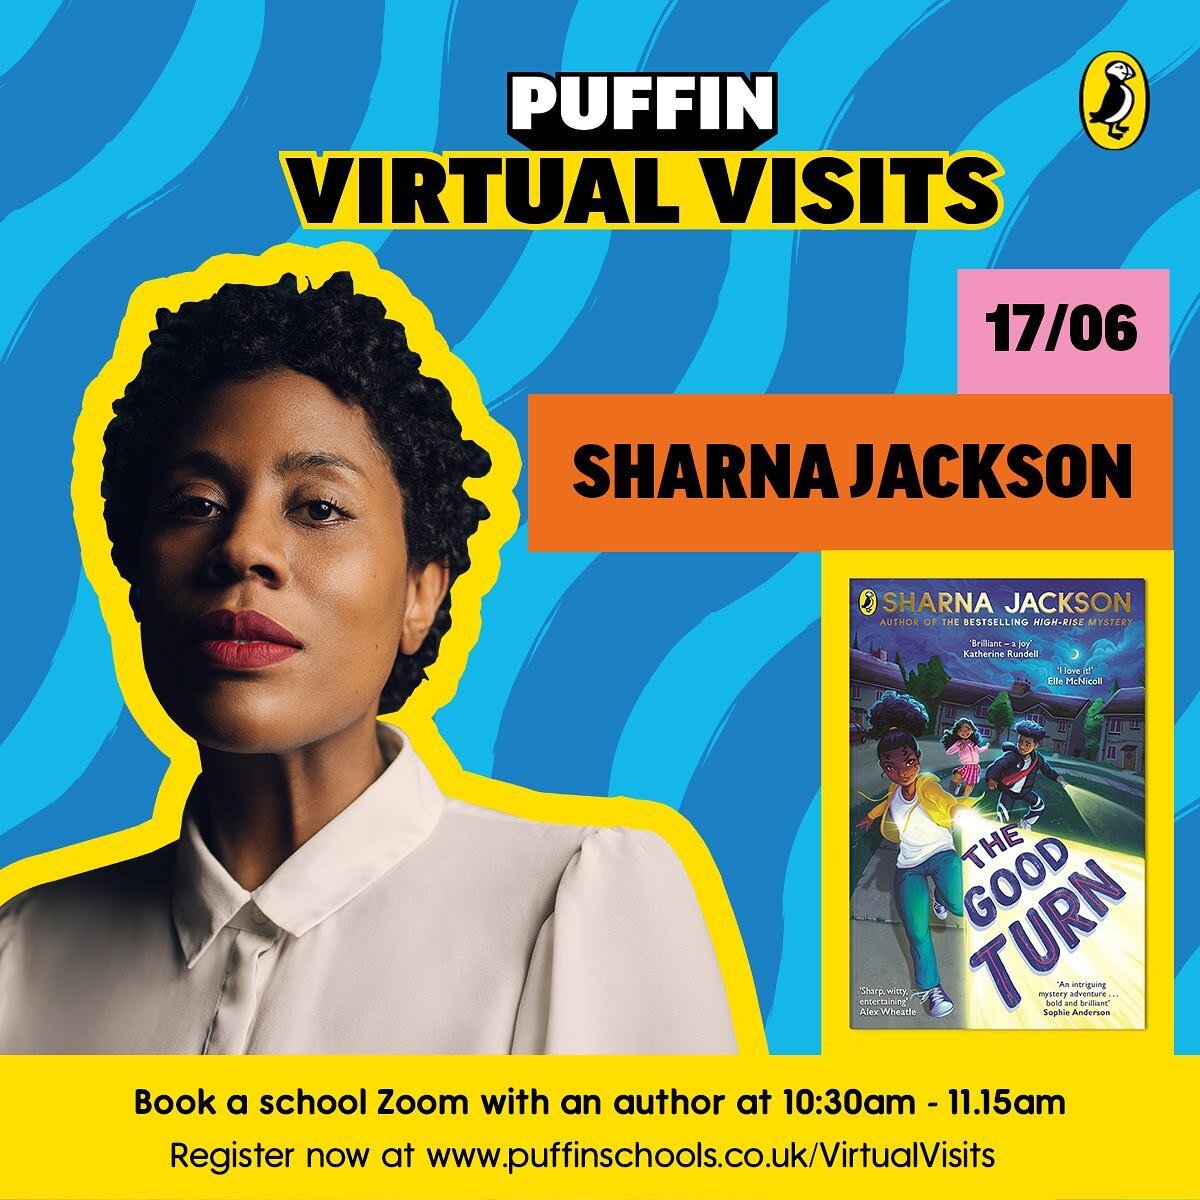 Doing a @puffinbooksuk Virtual Visit on June 17. Teachers on here, come on down. It&rsquo;s free, I&rsquo;ll make it fun.